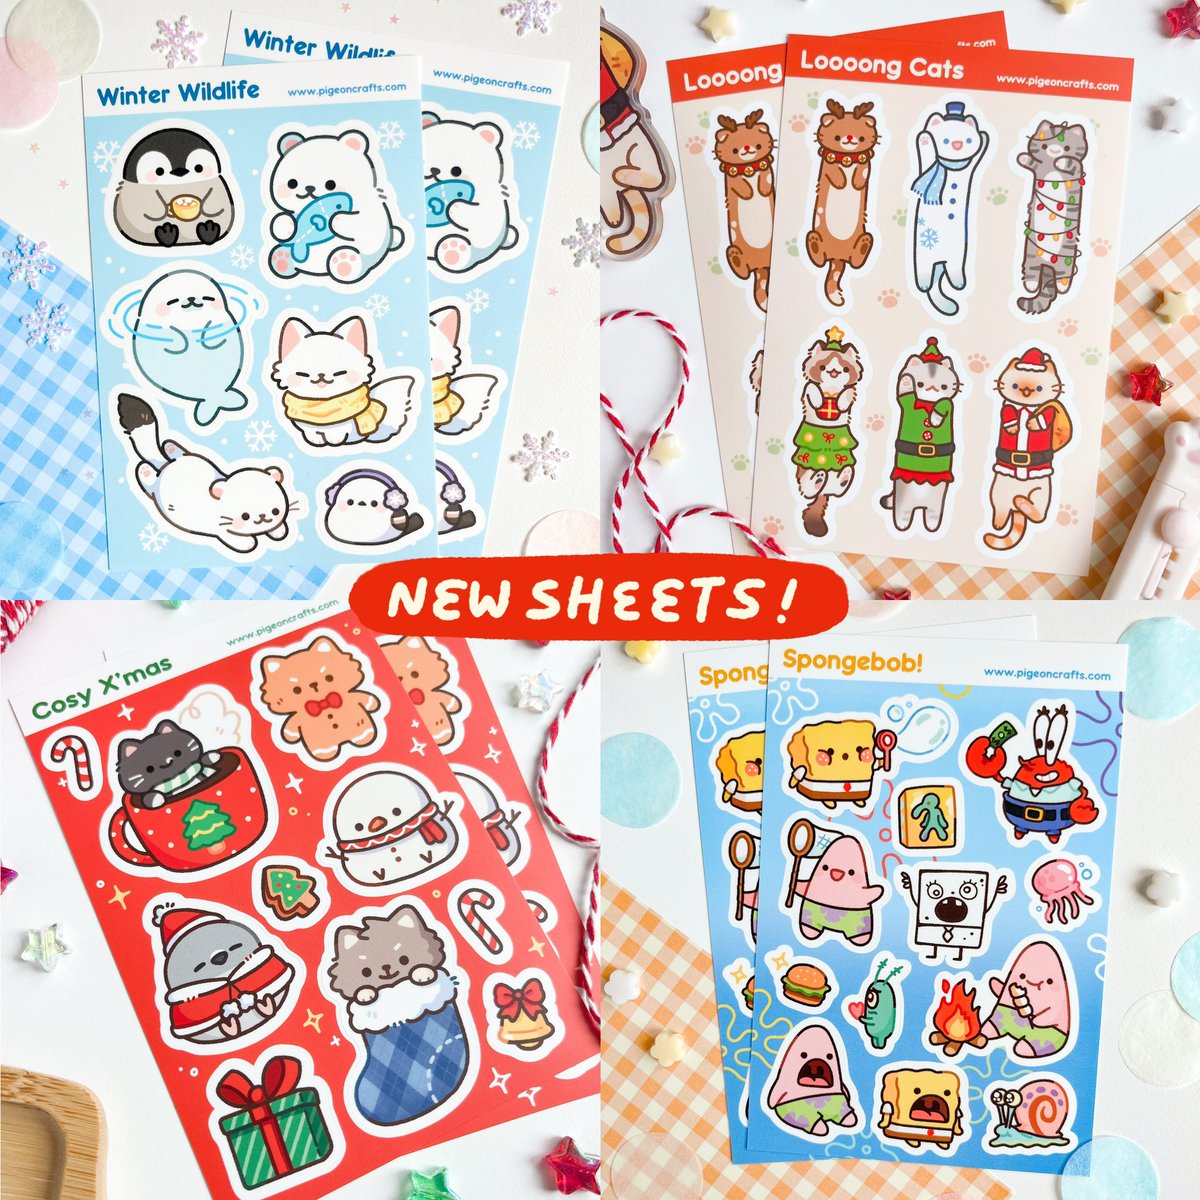 Our sh0p is LIVE!!❄️🎁 

We have lots of new holiday stuff, notebooks, stickers and more✨

🔗https://t.co/Z7JsBceya3 